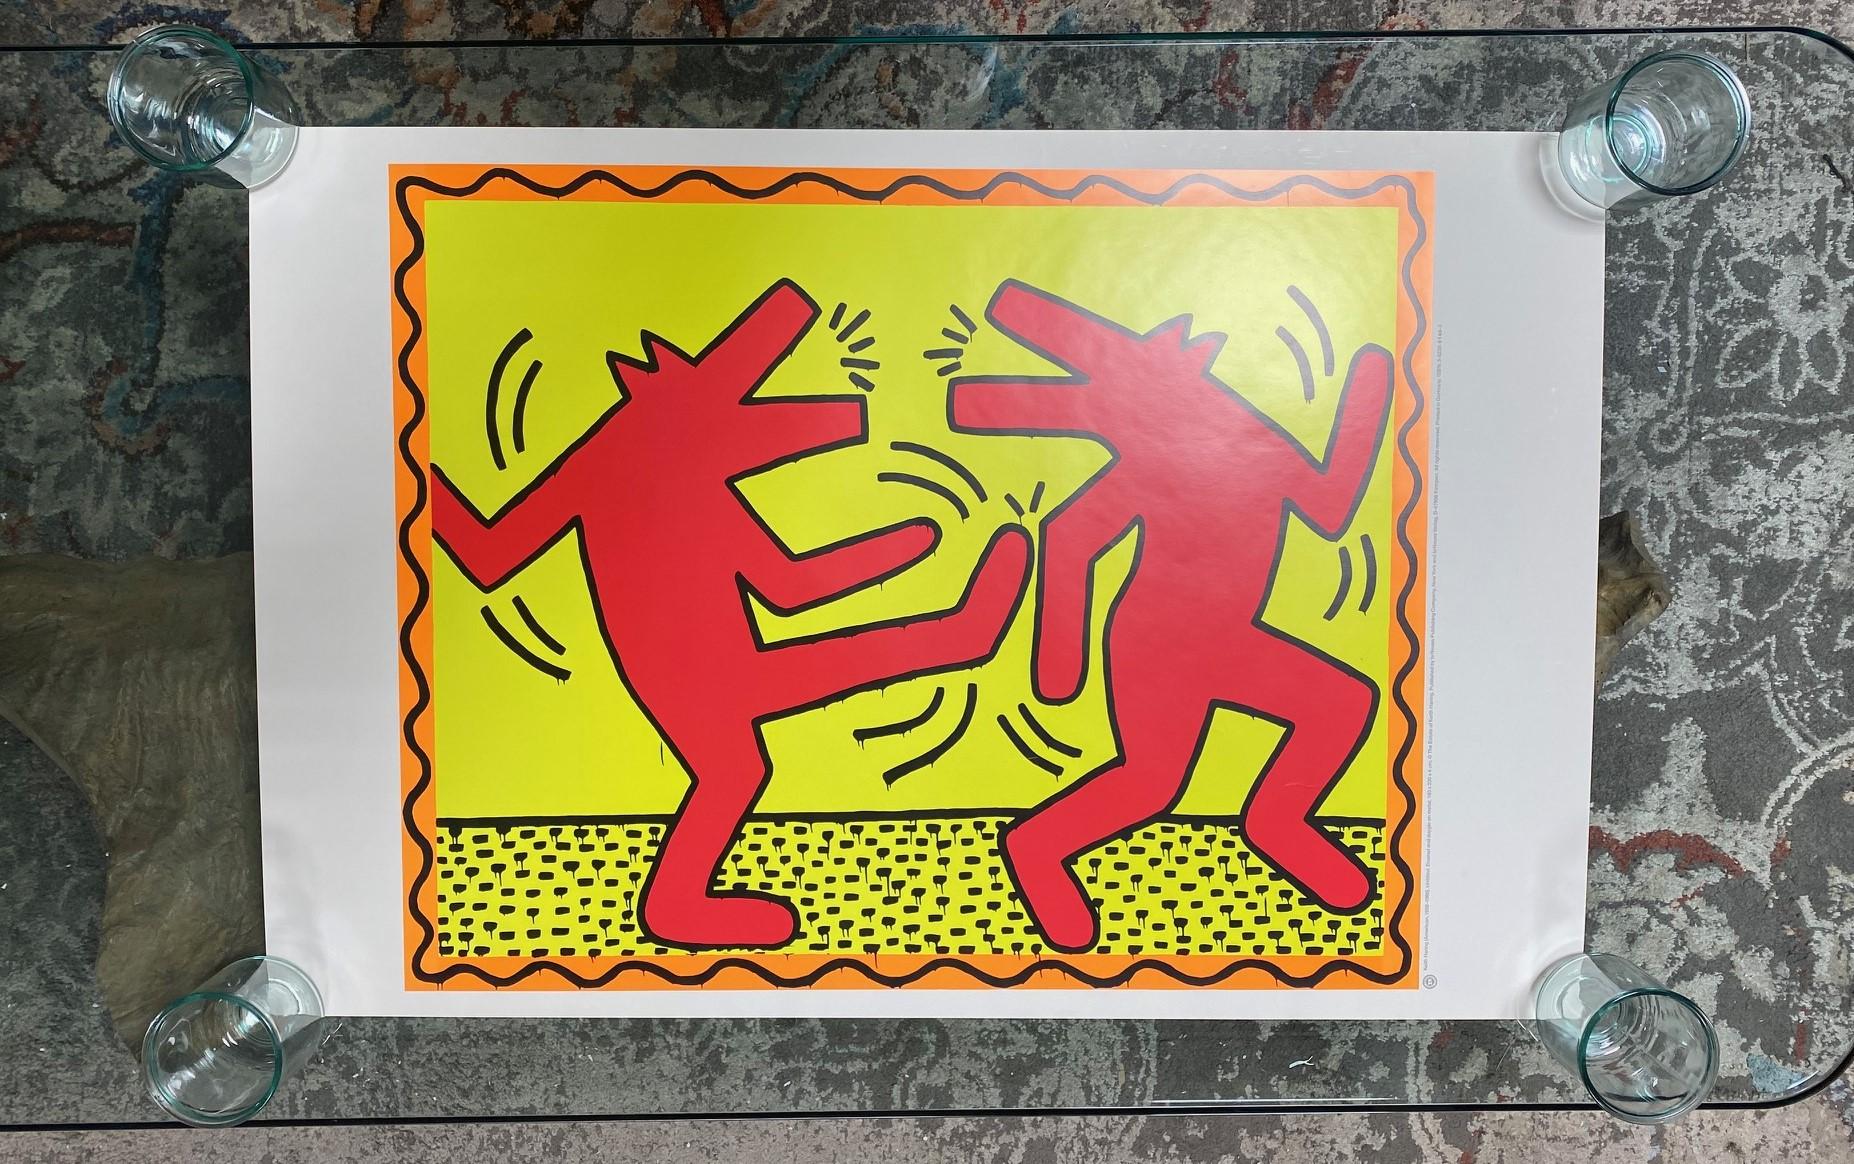 A rare and extremely hard-to-find limited vintage Keith Haring (1958-1990) Pop Art offset lithograph poster featuring one of his more coveted images of two dancing dogs/wolves from an artwork Haring created in 1982.  The official 